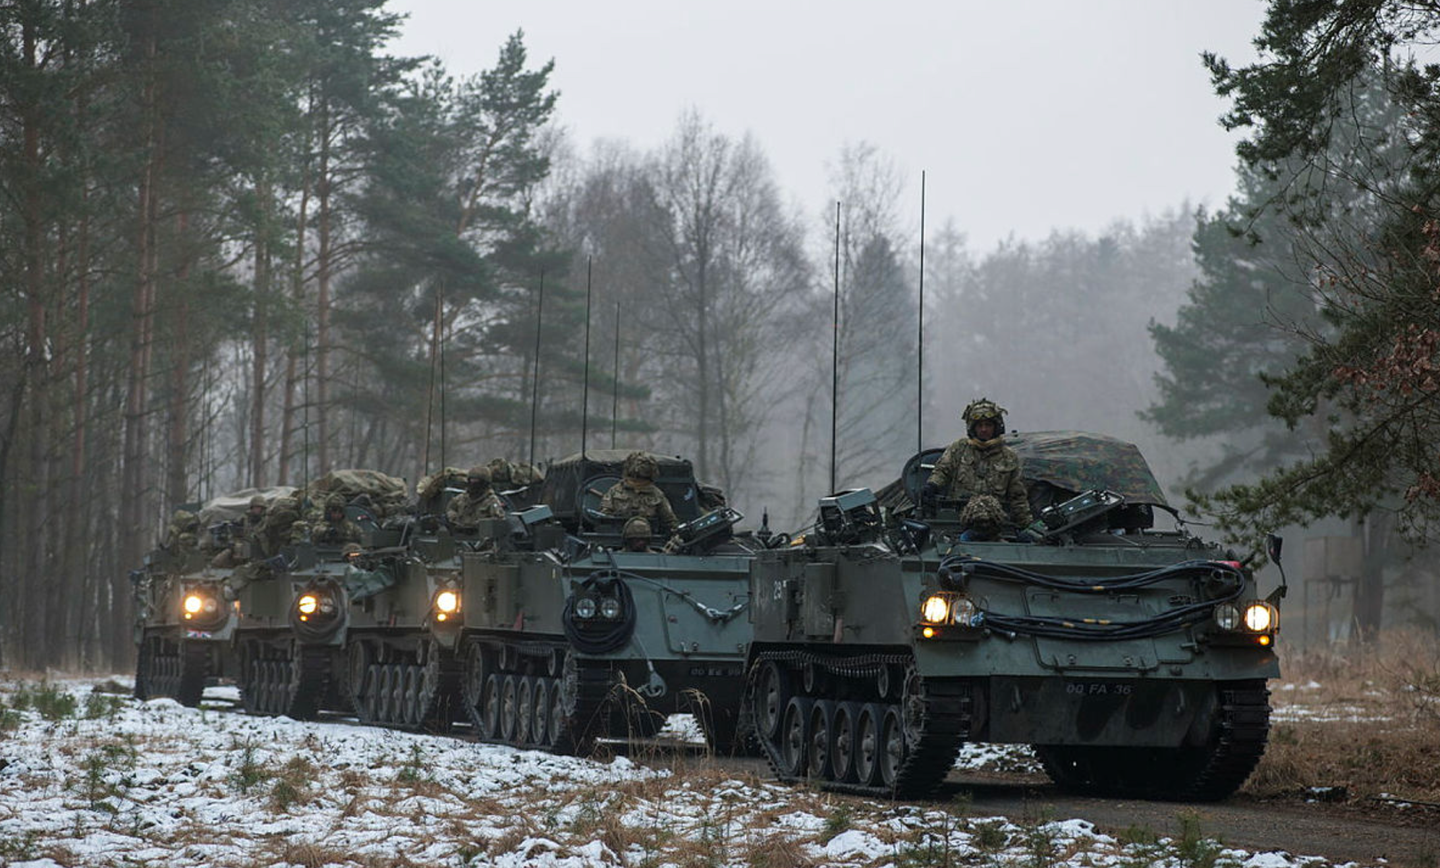 British Army Bulldogs (upgraded FV432s) during a winter exercise in Germany. <em>Crown Copyright</em>